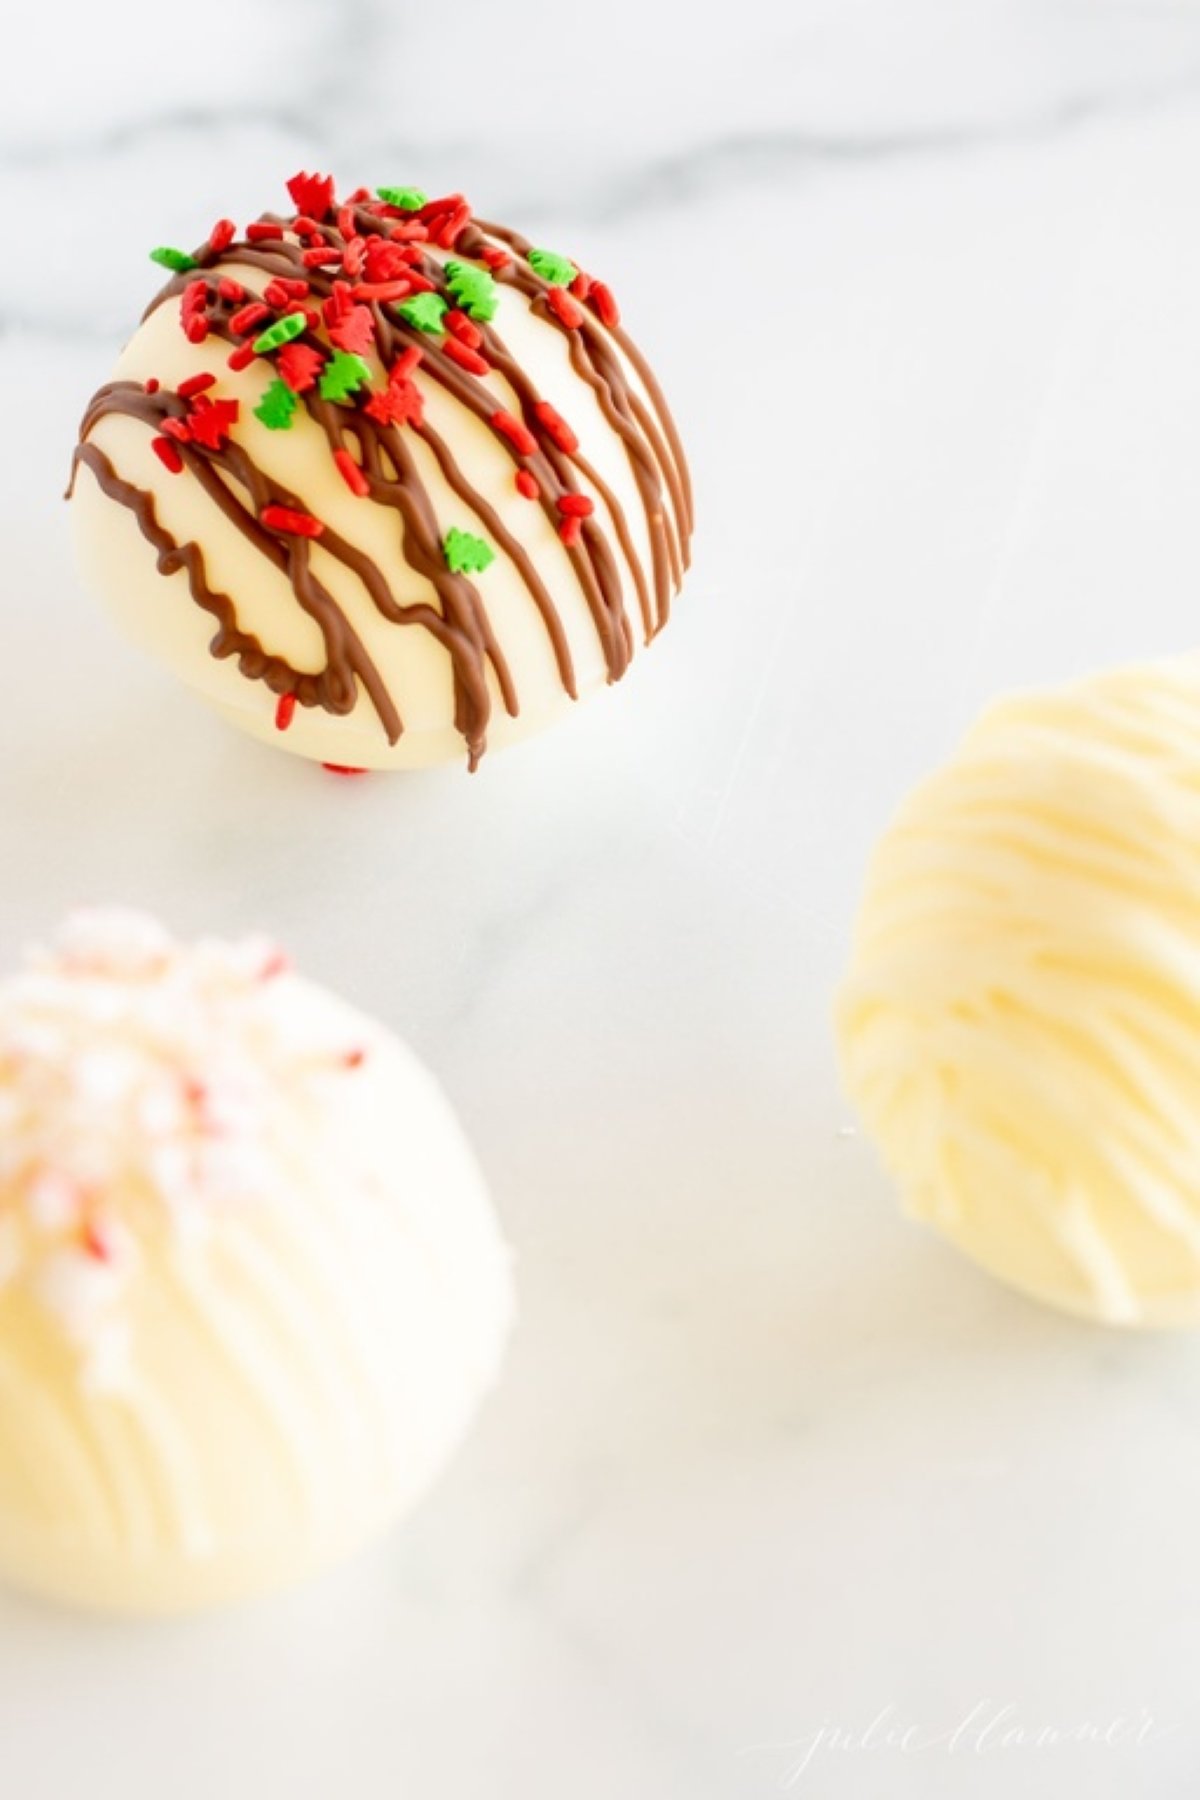 Three white chocolate hot cocoa bombs on a white marble countertop